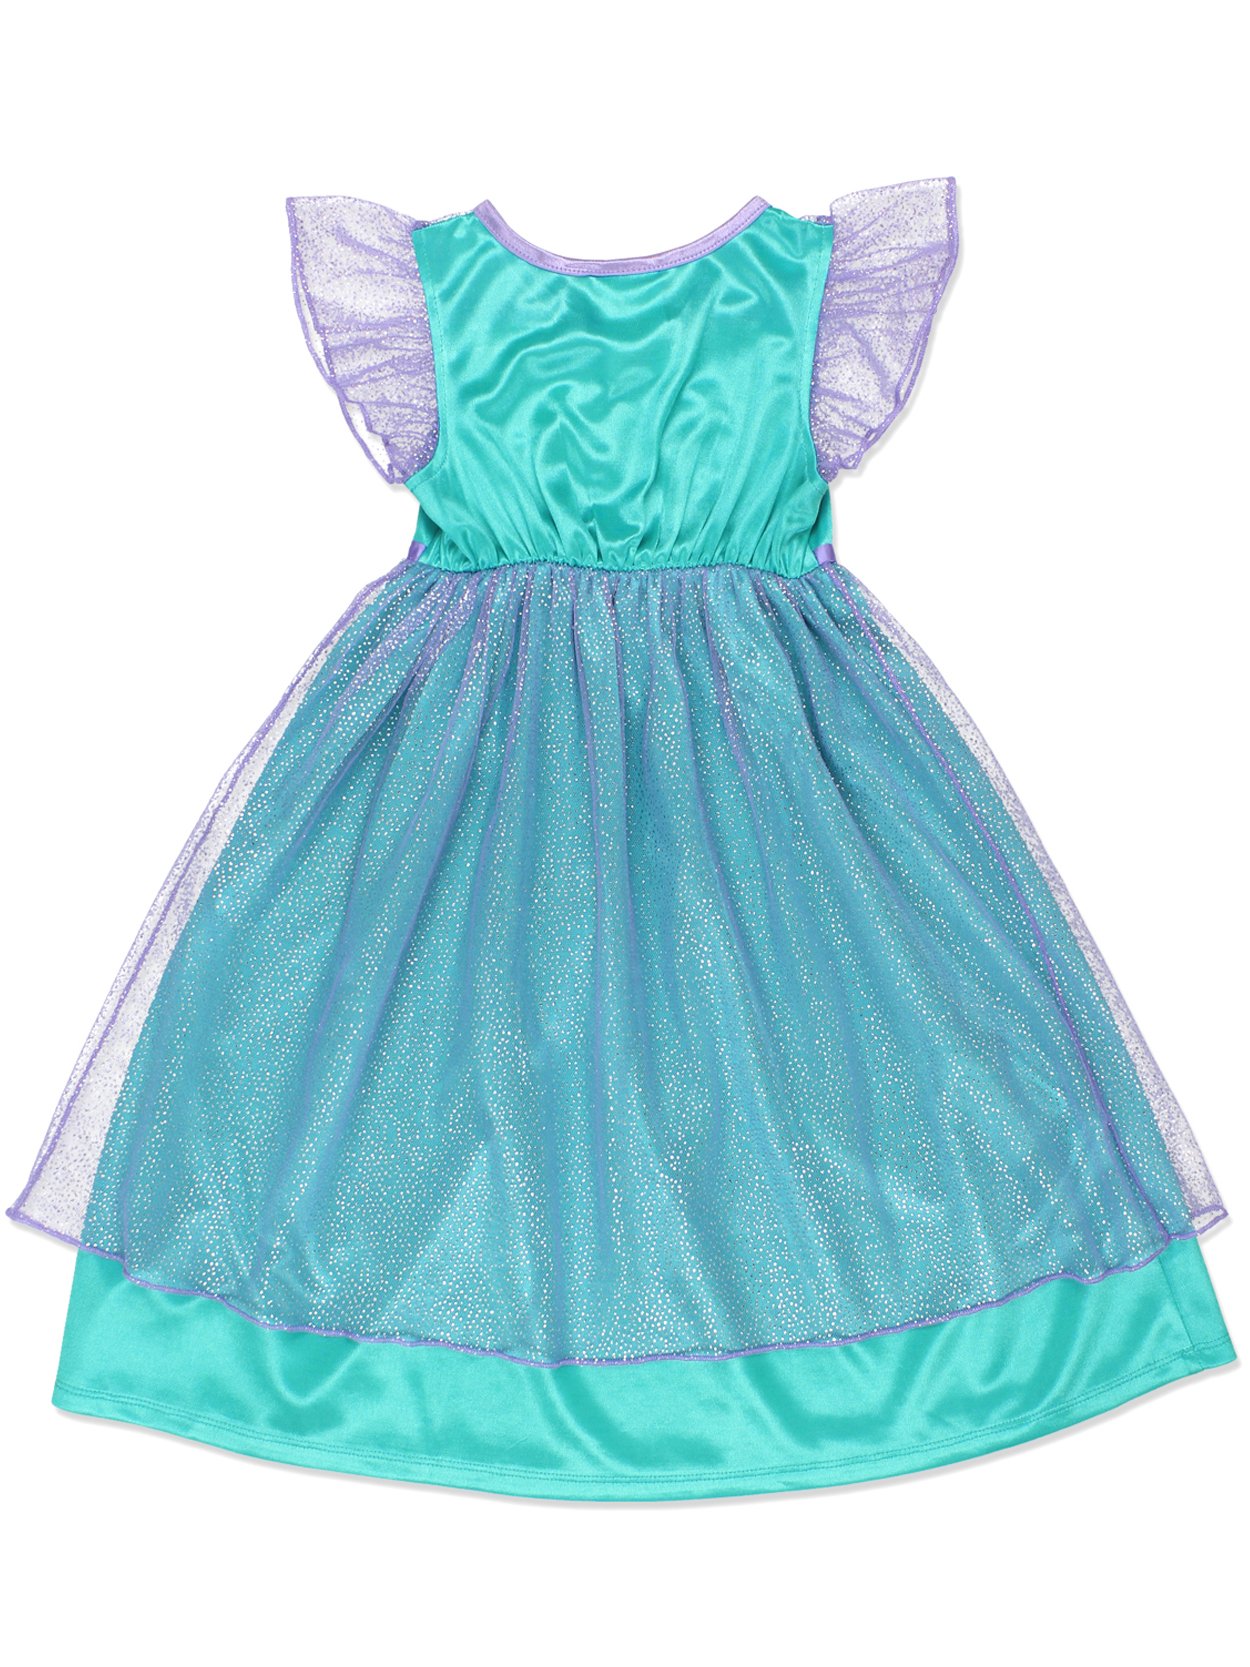 The Little Mermaid Ariel Toddler Girls Fantasy Gown Nightgown Pajamas 21LM165TGS - image 2 of 7